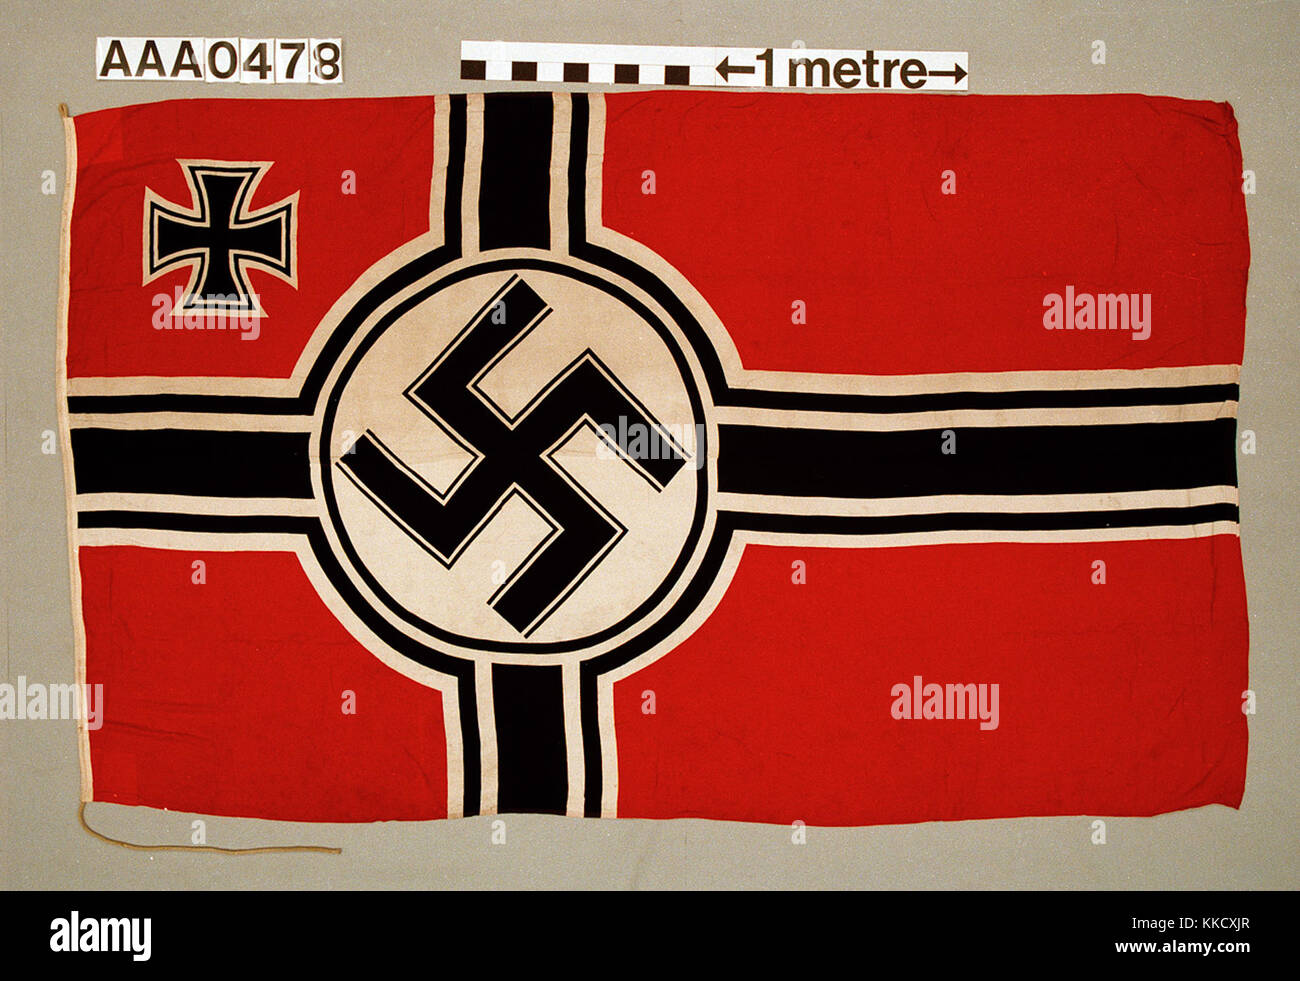 Nazi German naval ensign, 1935-45 pattern. Stencilled on the hoist is: 'REICHSKRIEGSFLG 300 X 500 PLÜSCHWEBER GREFRATH'. The flag is made of machine sewn cotton with the design printed onto the fabric. A rope is attached to hoist the flag. Design:  Red field with off centre black cross, edged white/black/white. It has a white disc in the centre with a black swastika. In the canton an iron cross, edged white/black/white.  AAA0478 Nazi German naval ensign (1935-1945) RMG RP-33-4-5 Stock Photo